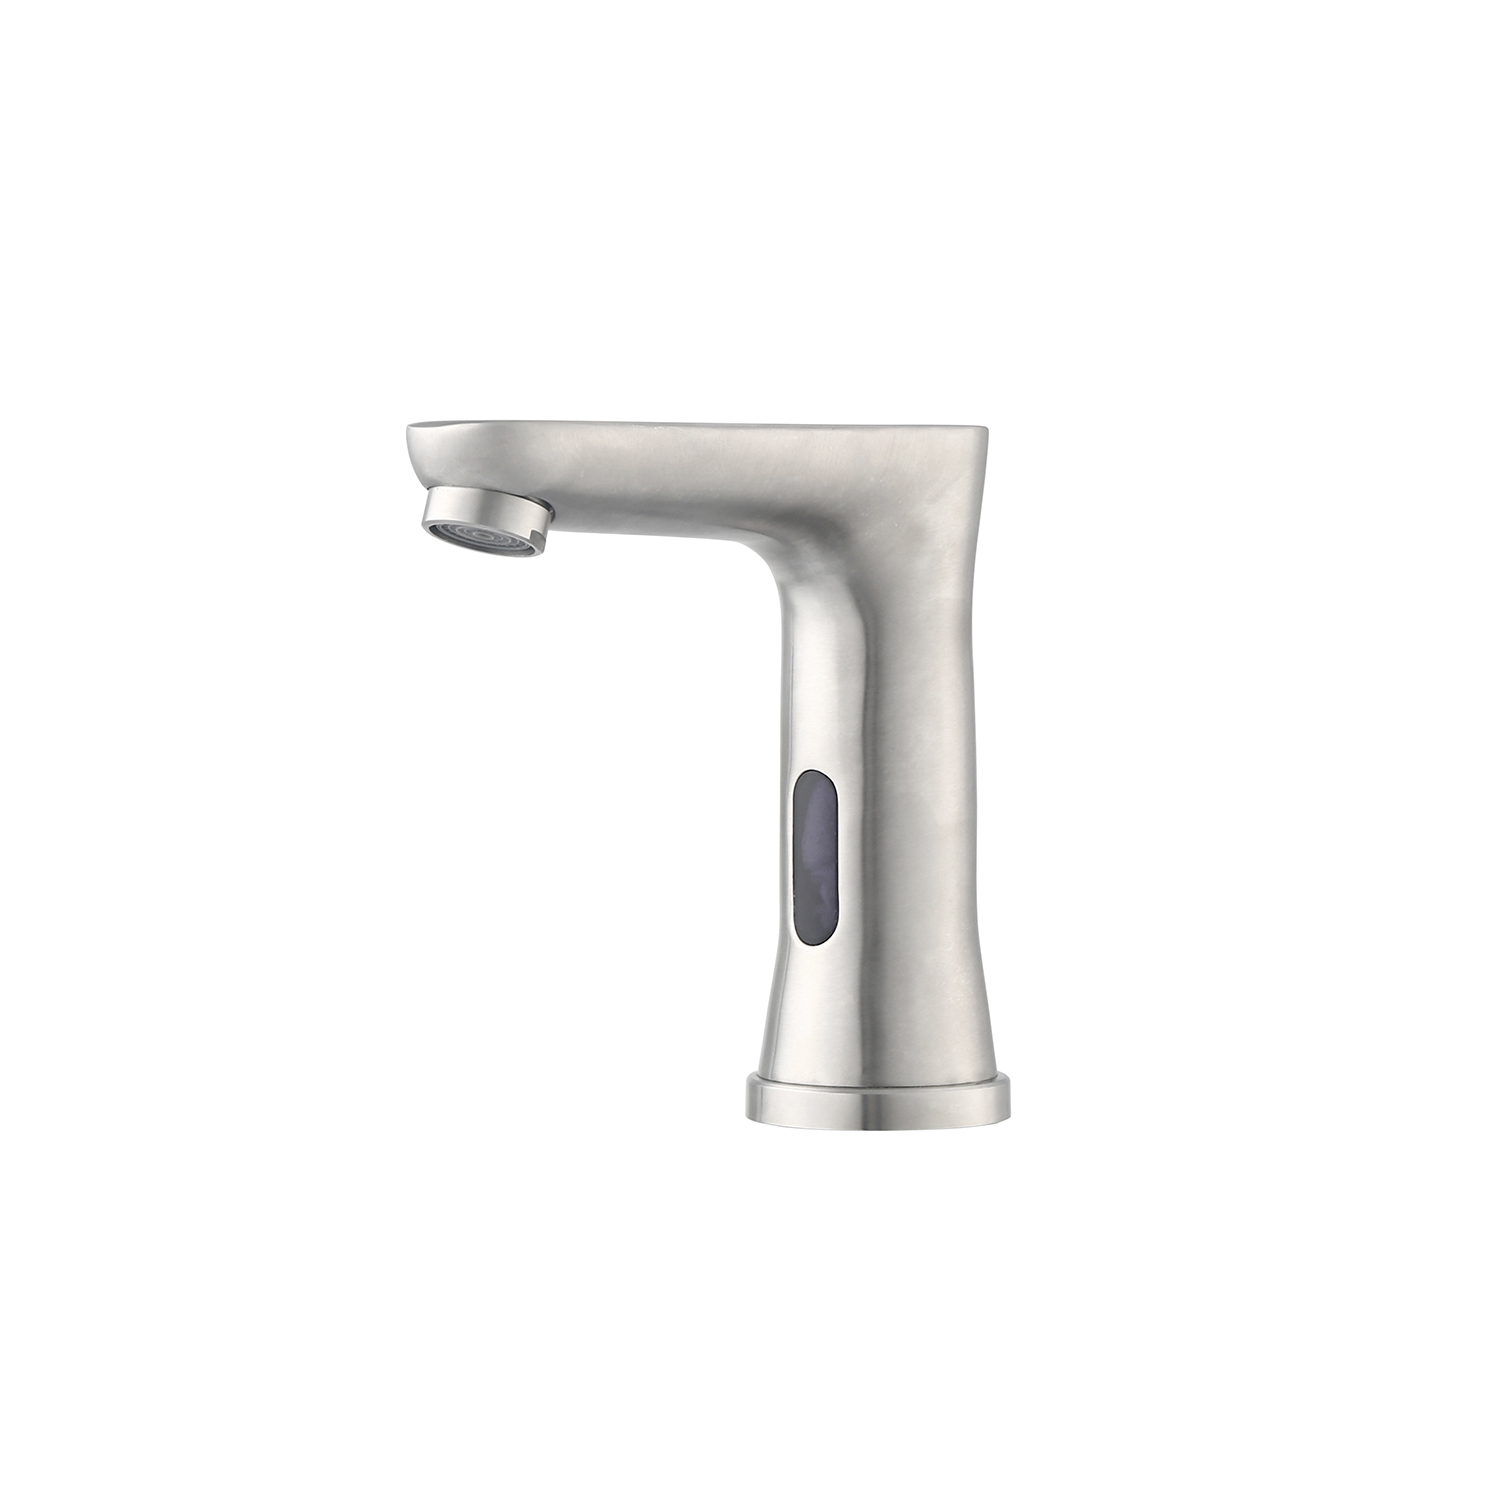 Manual for Self-powered Auto Faucet XS-5030A